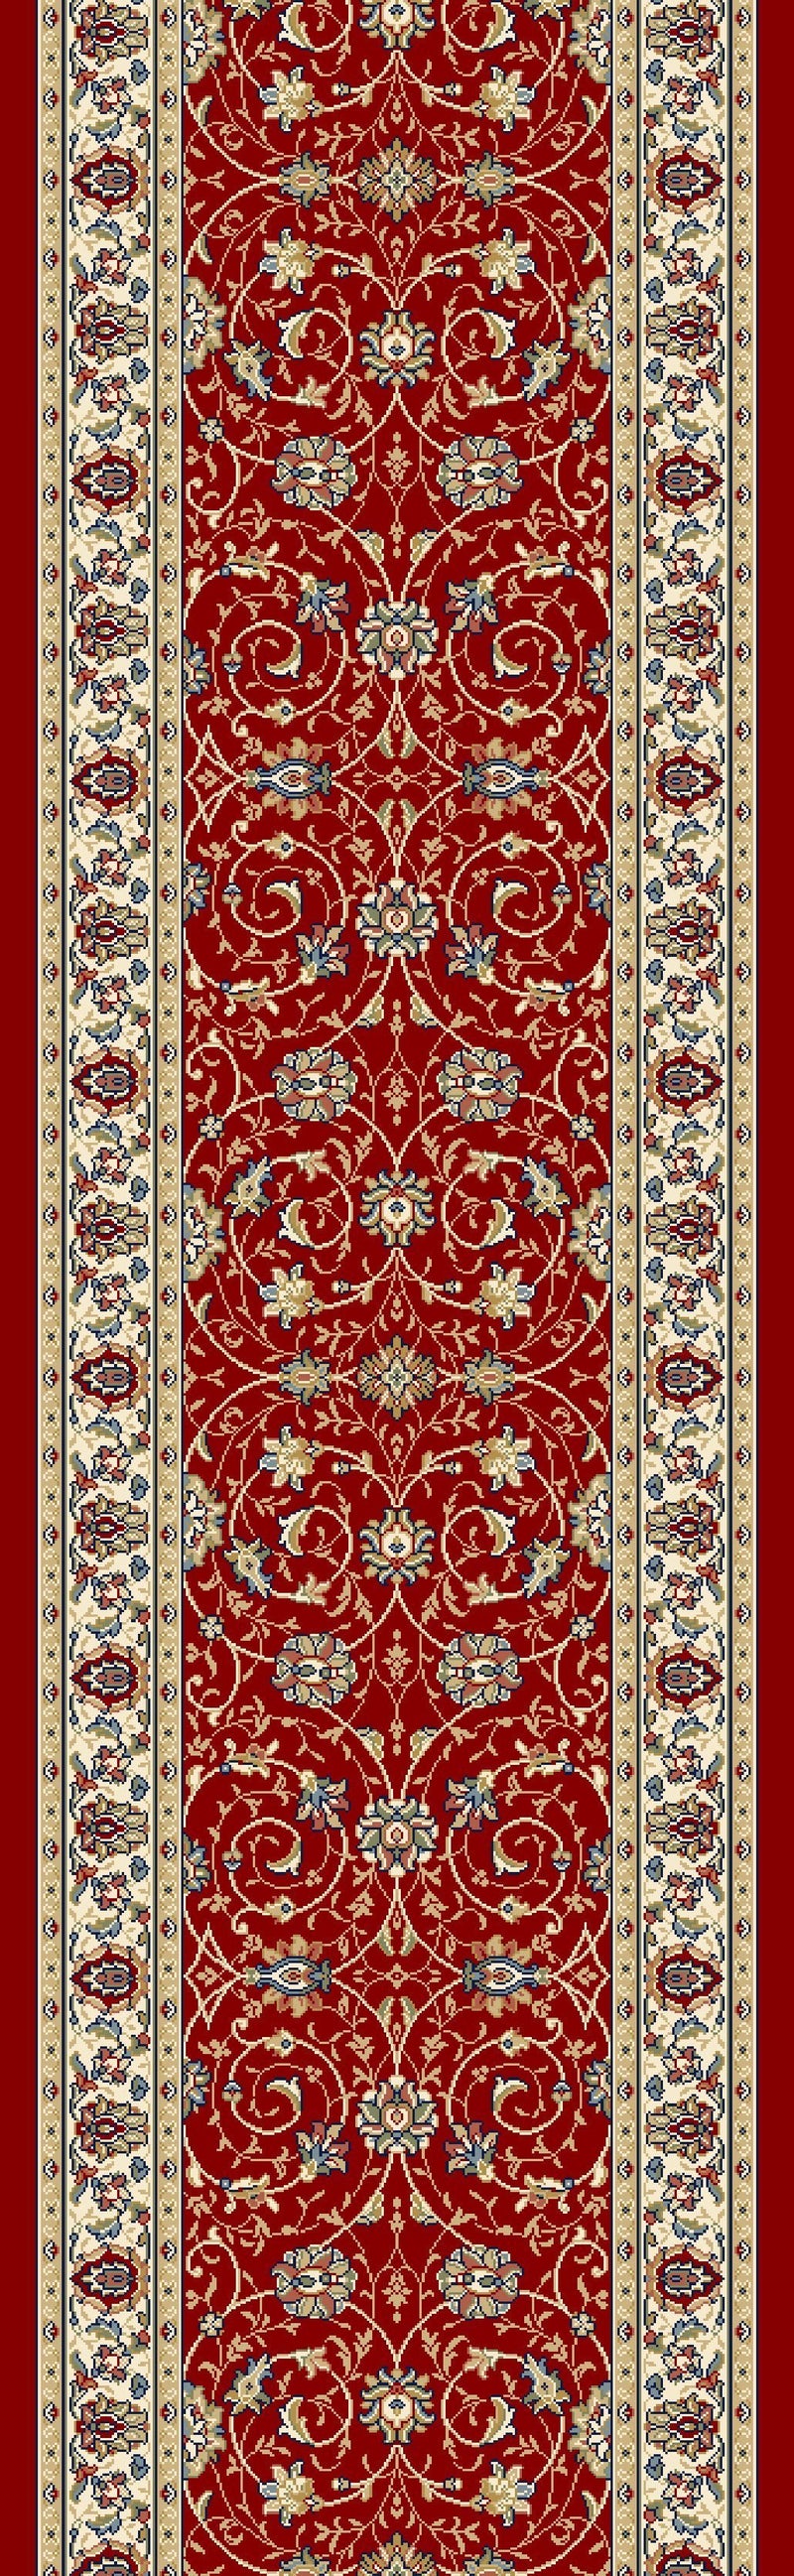 Dynamic Area Rugs 26in x 1Ft-Sold By The Foot Ancient Garden Area Rugs 57120-1464 Red 100% Poly Belgium 13 Sizes